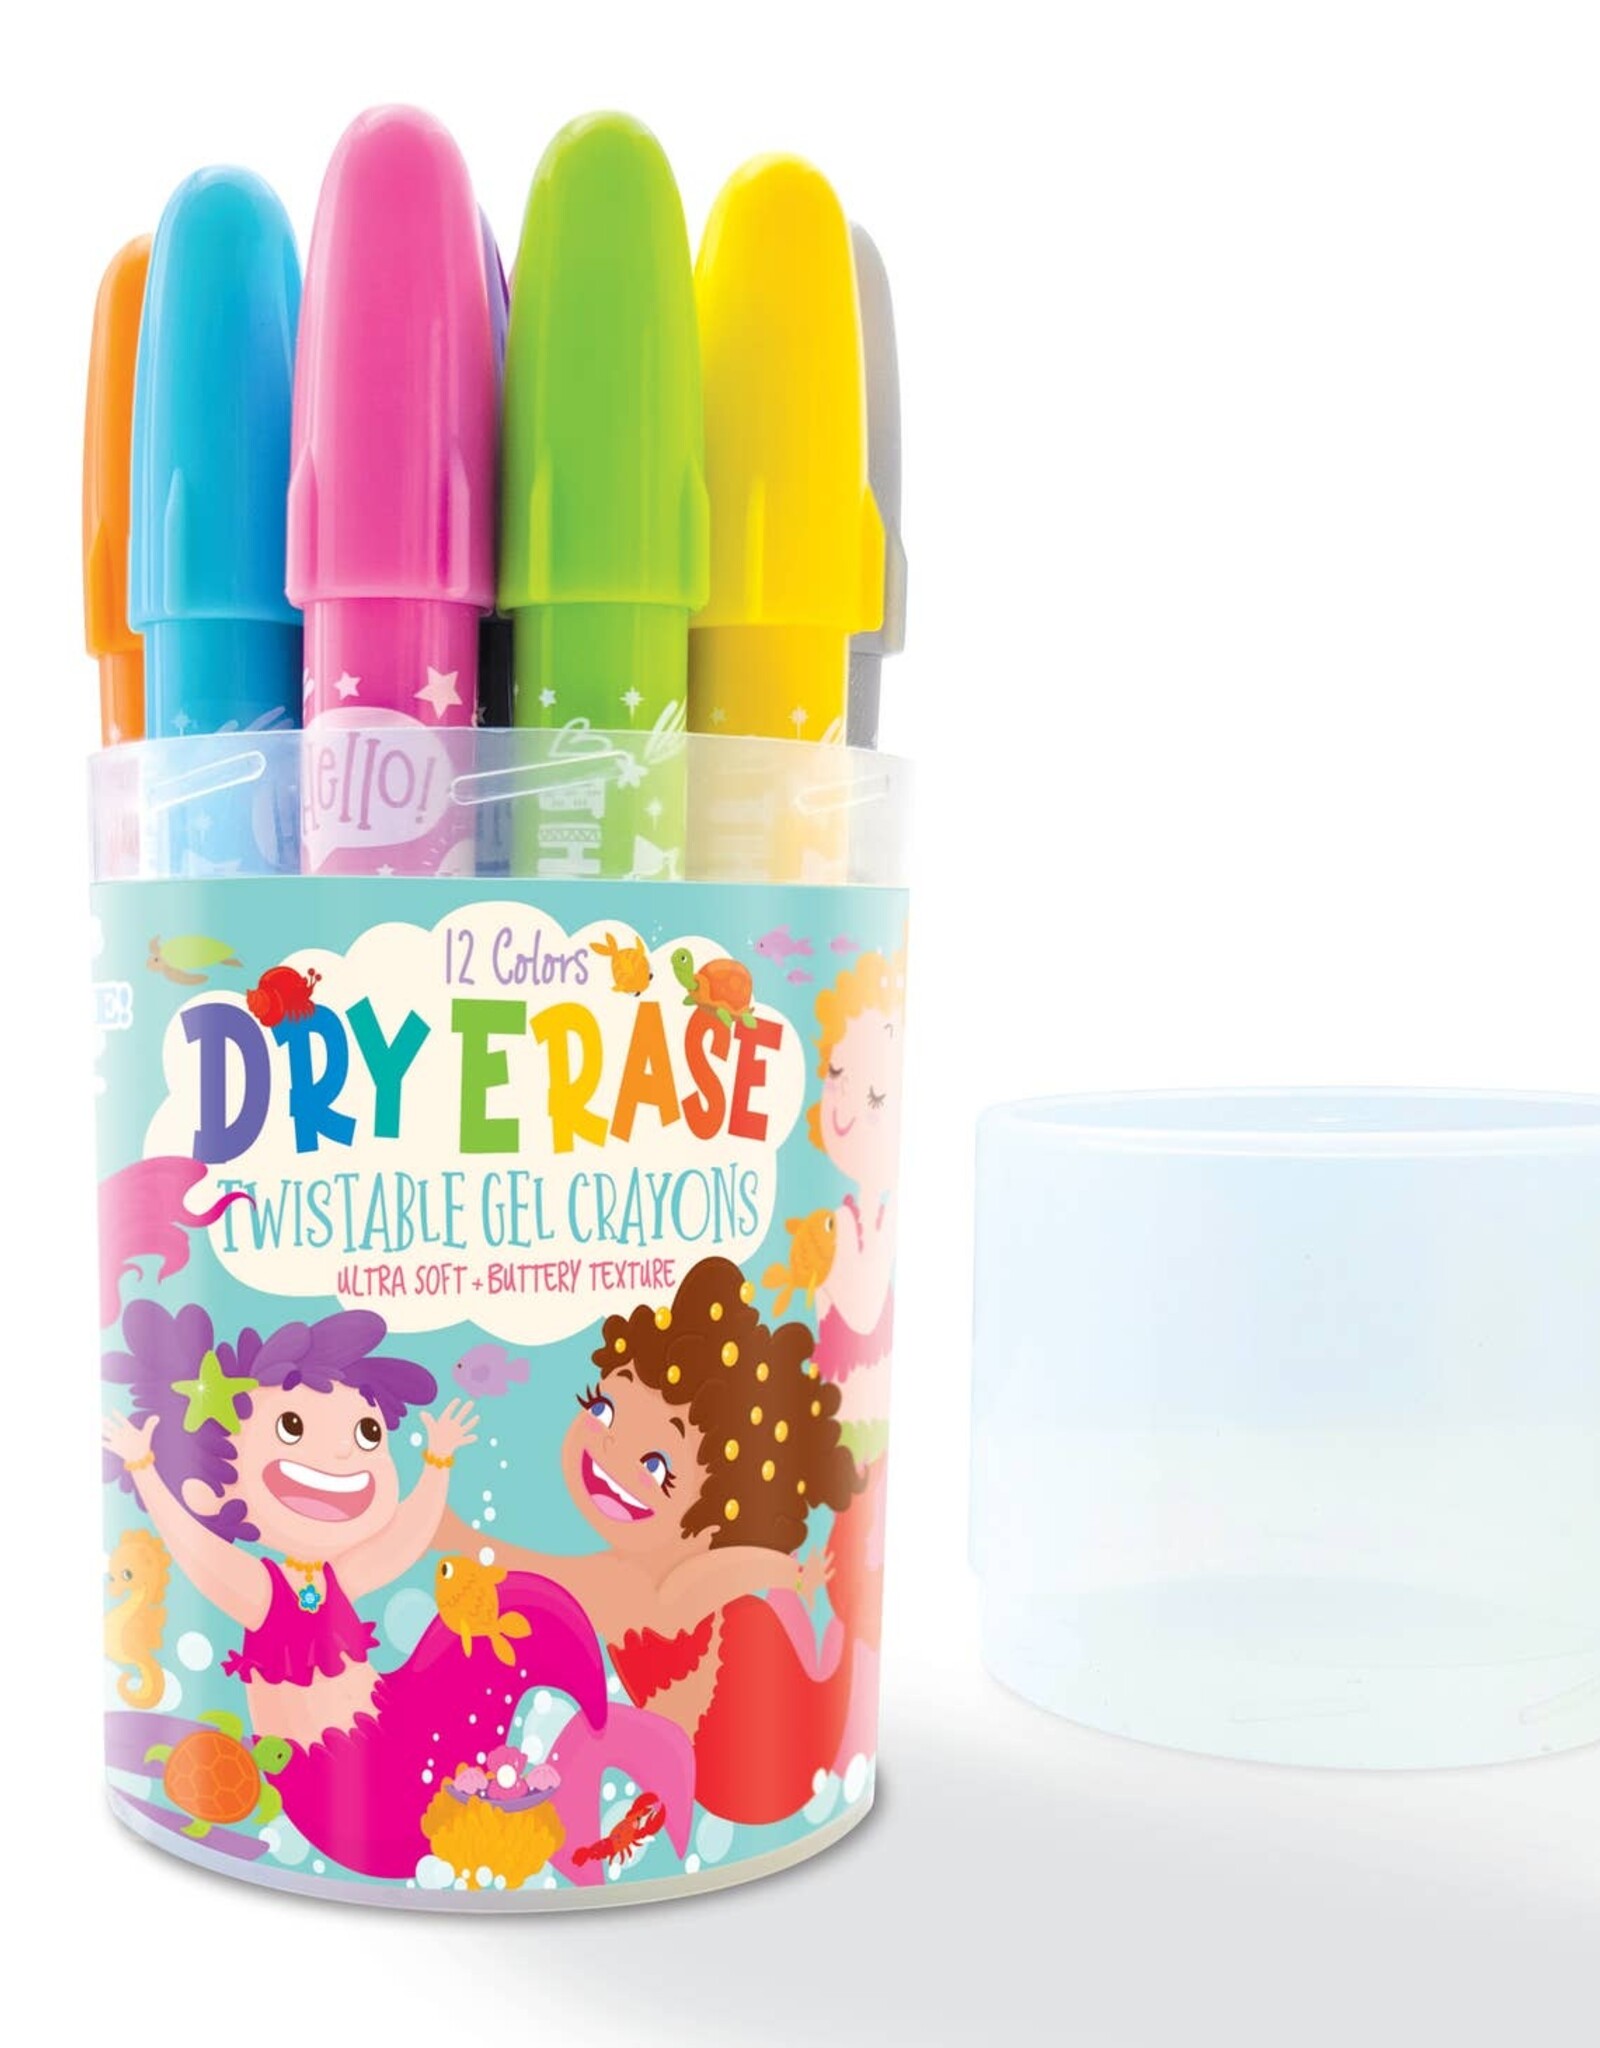 The Piggy Story Dry Erase Twistable Gel Crayon Magical Mermaids